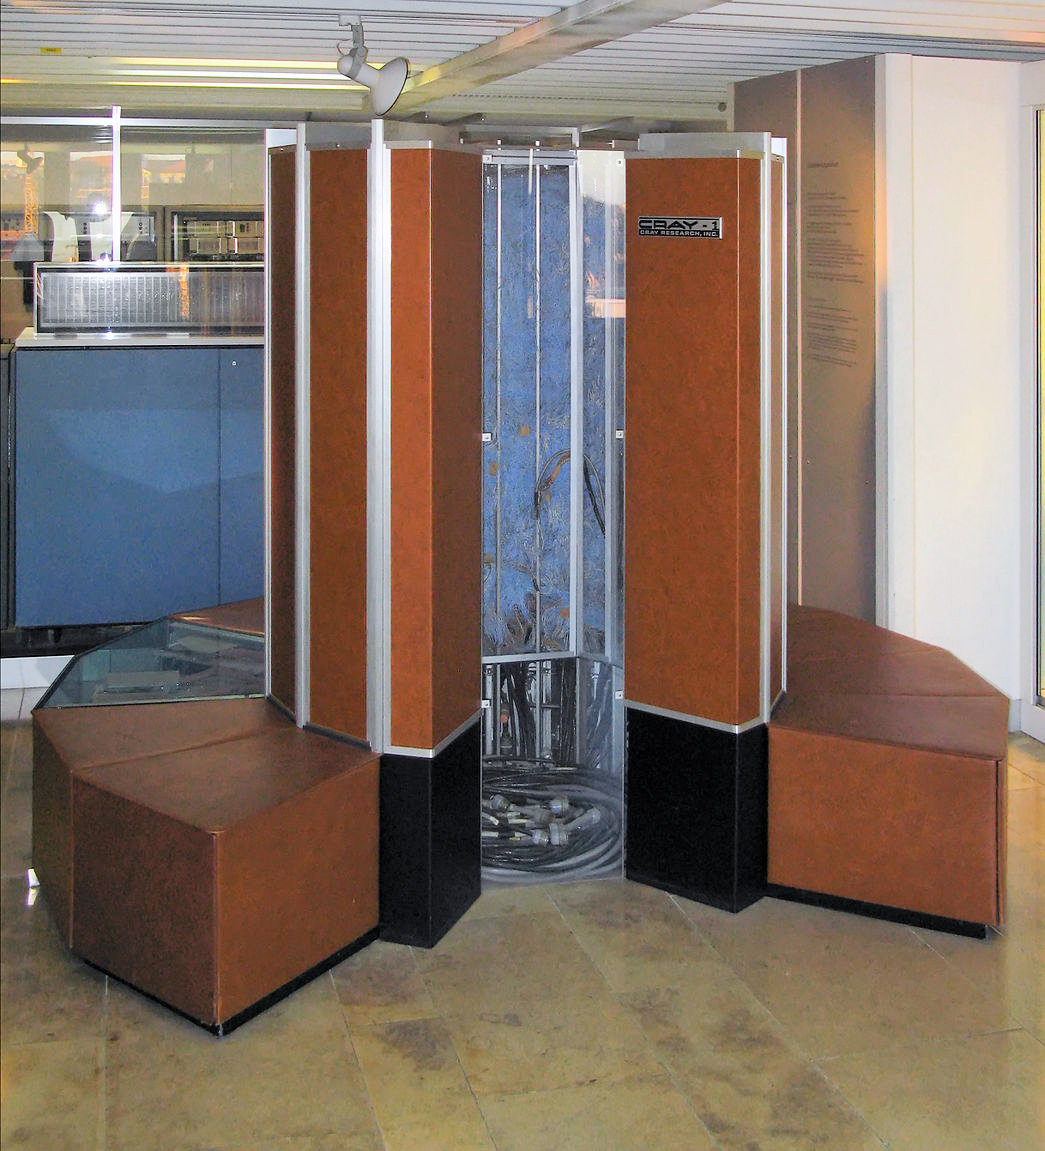 Picture of a Cray 1